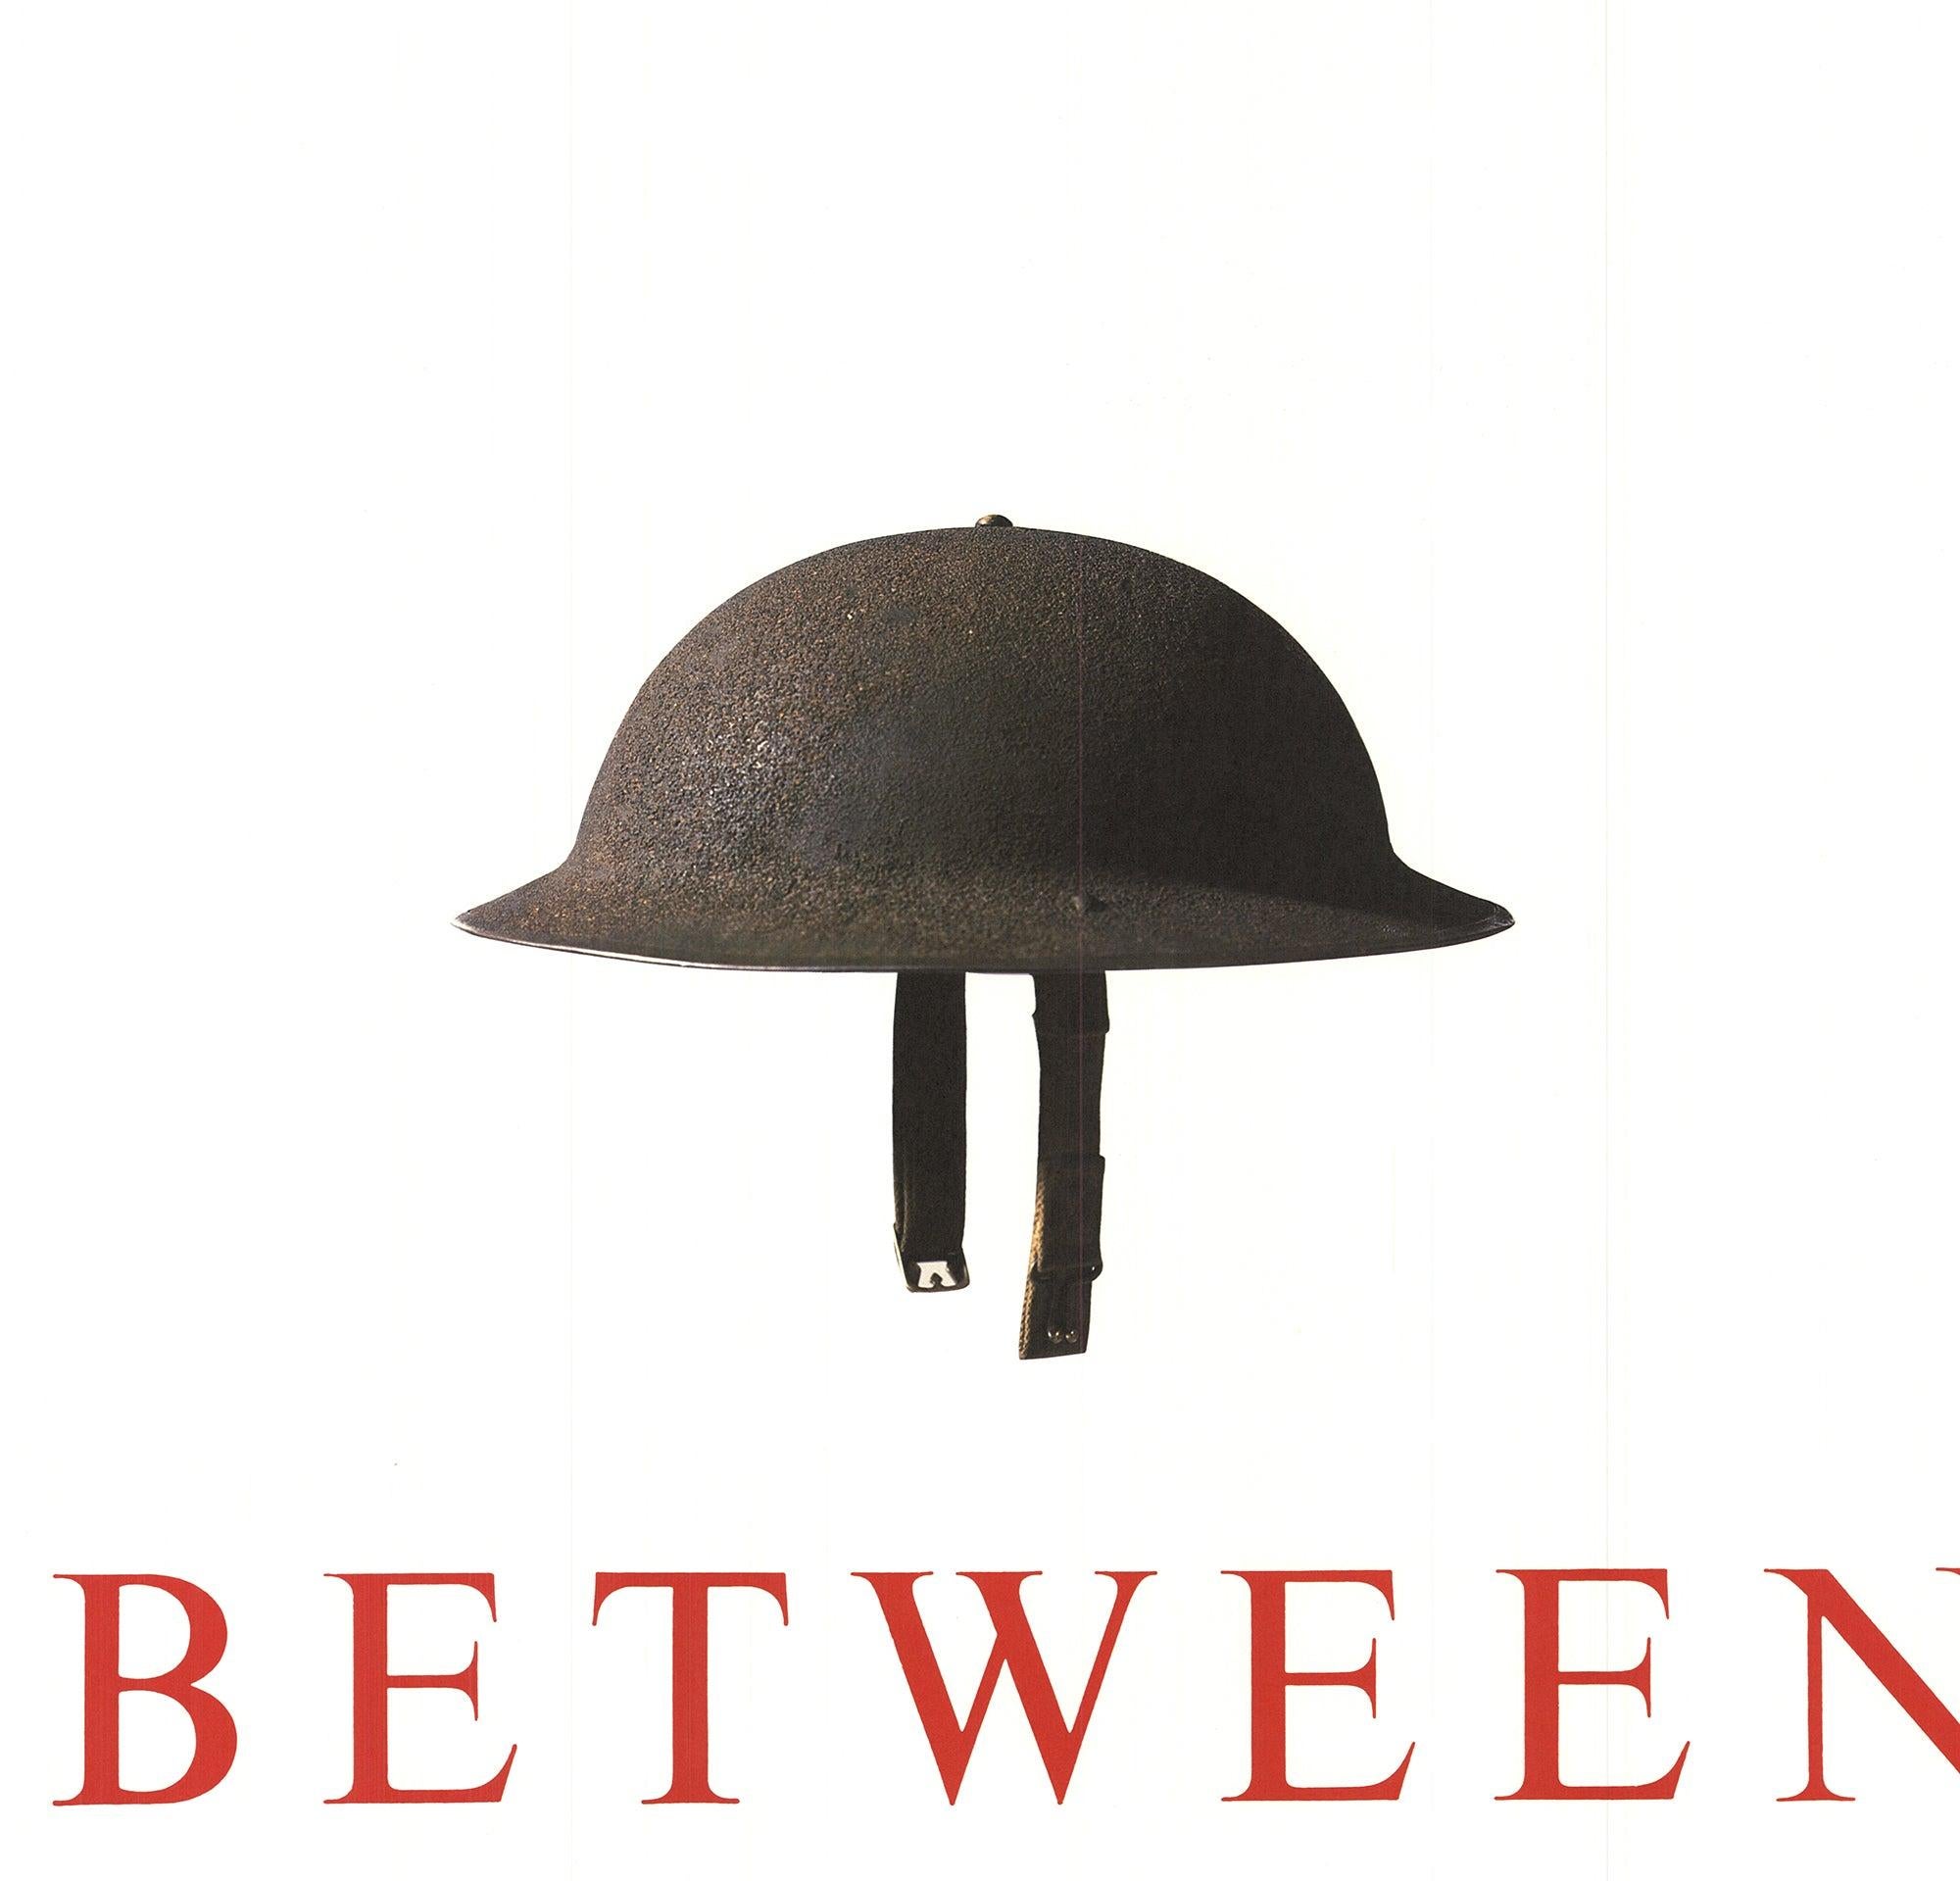 Ivan Chermayeff 'Between the Wars'- Offset Lithograph For Sale 2